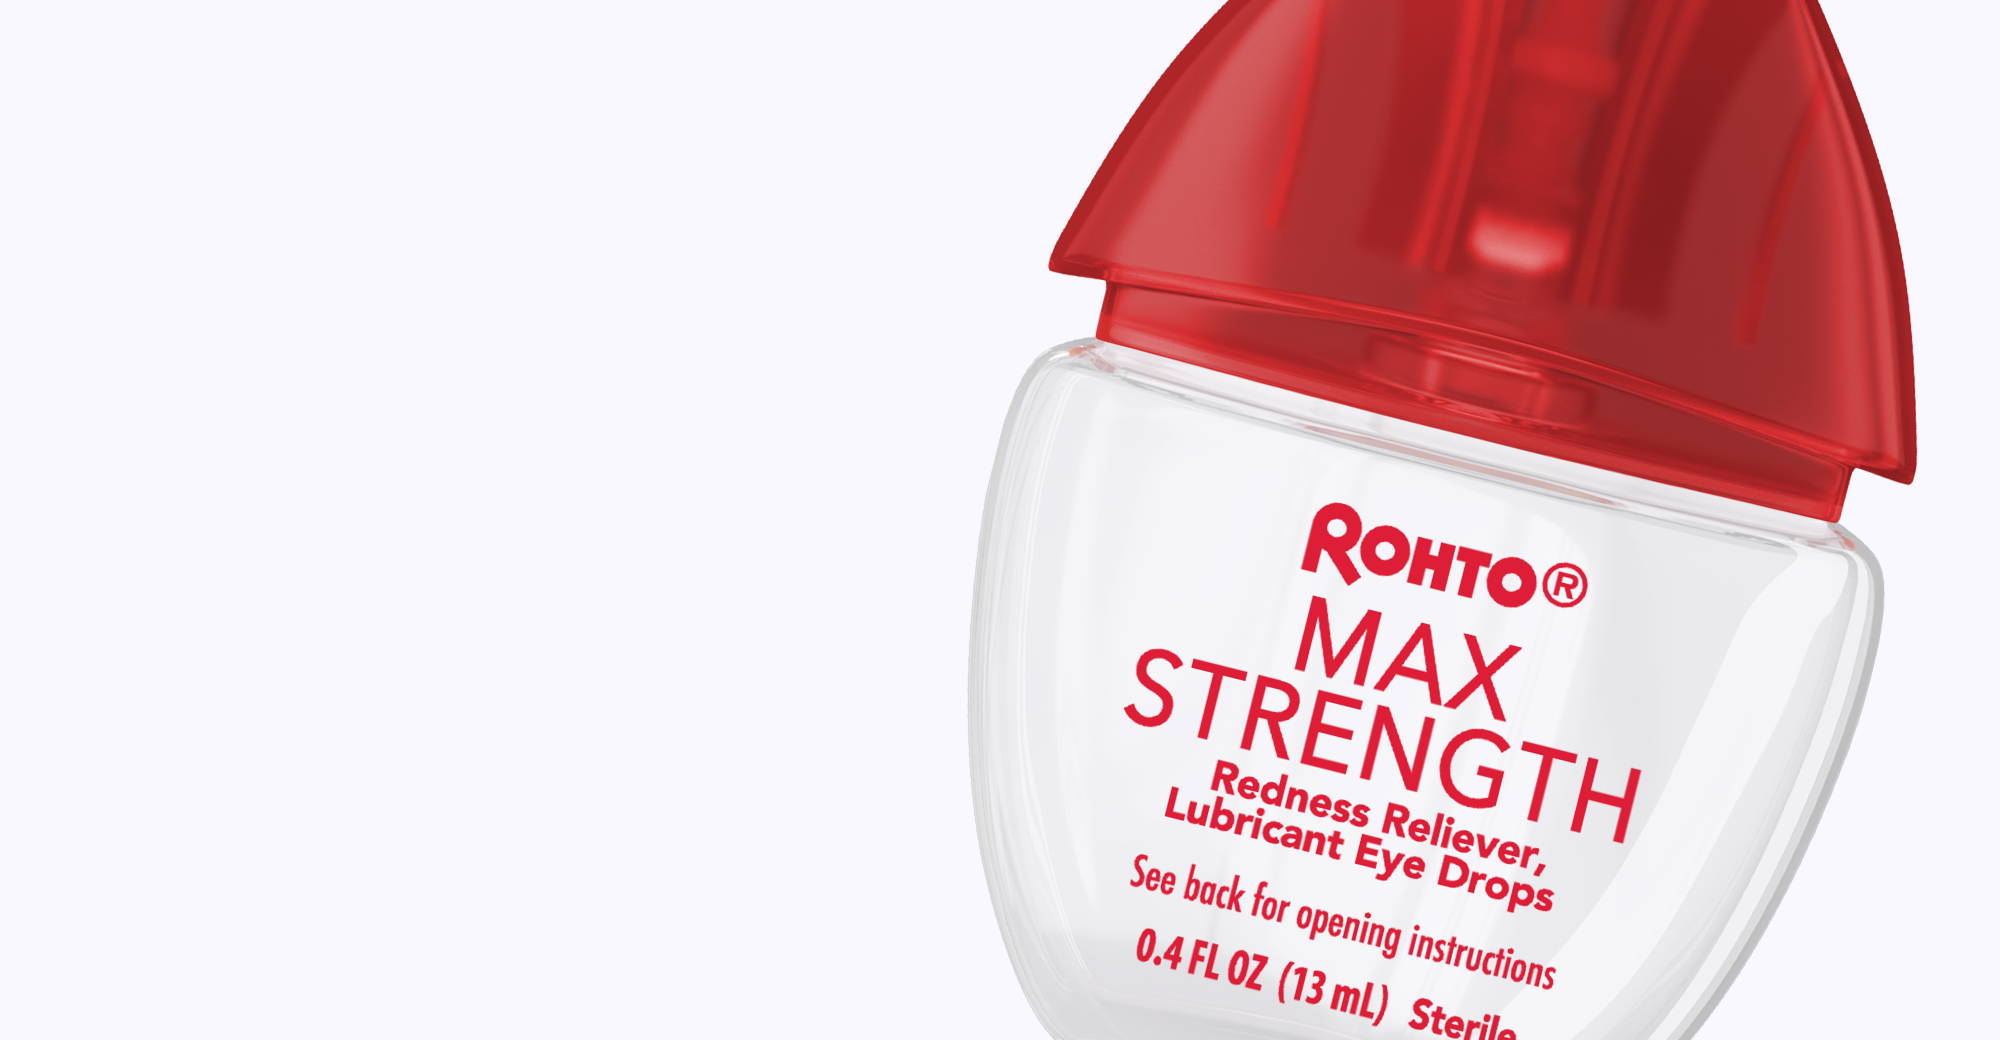 Rohto® Max Strength Redness Relief eye drops